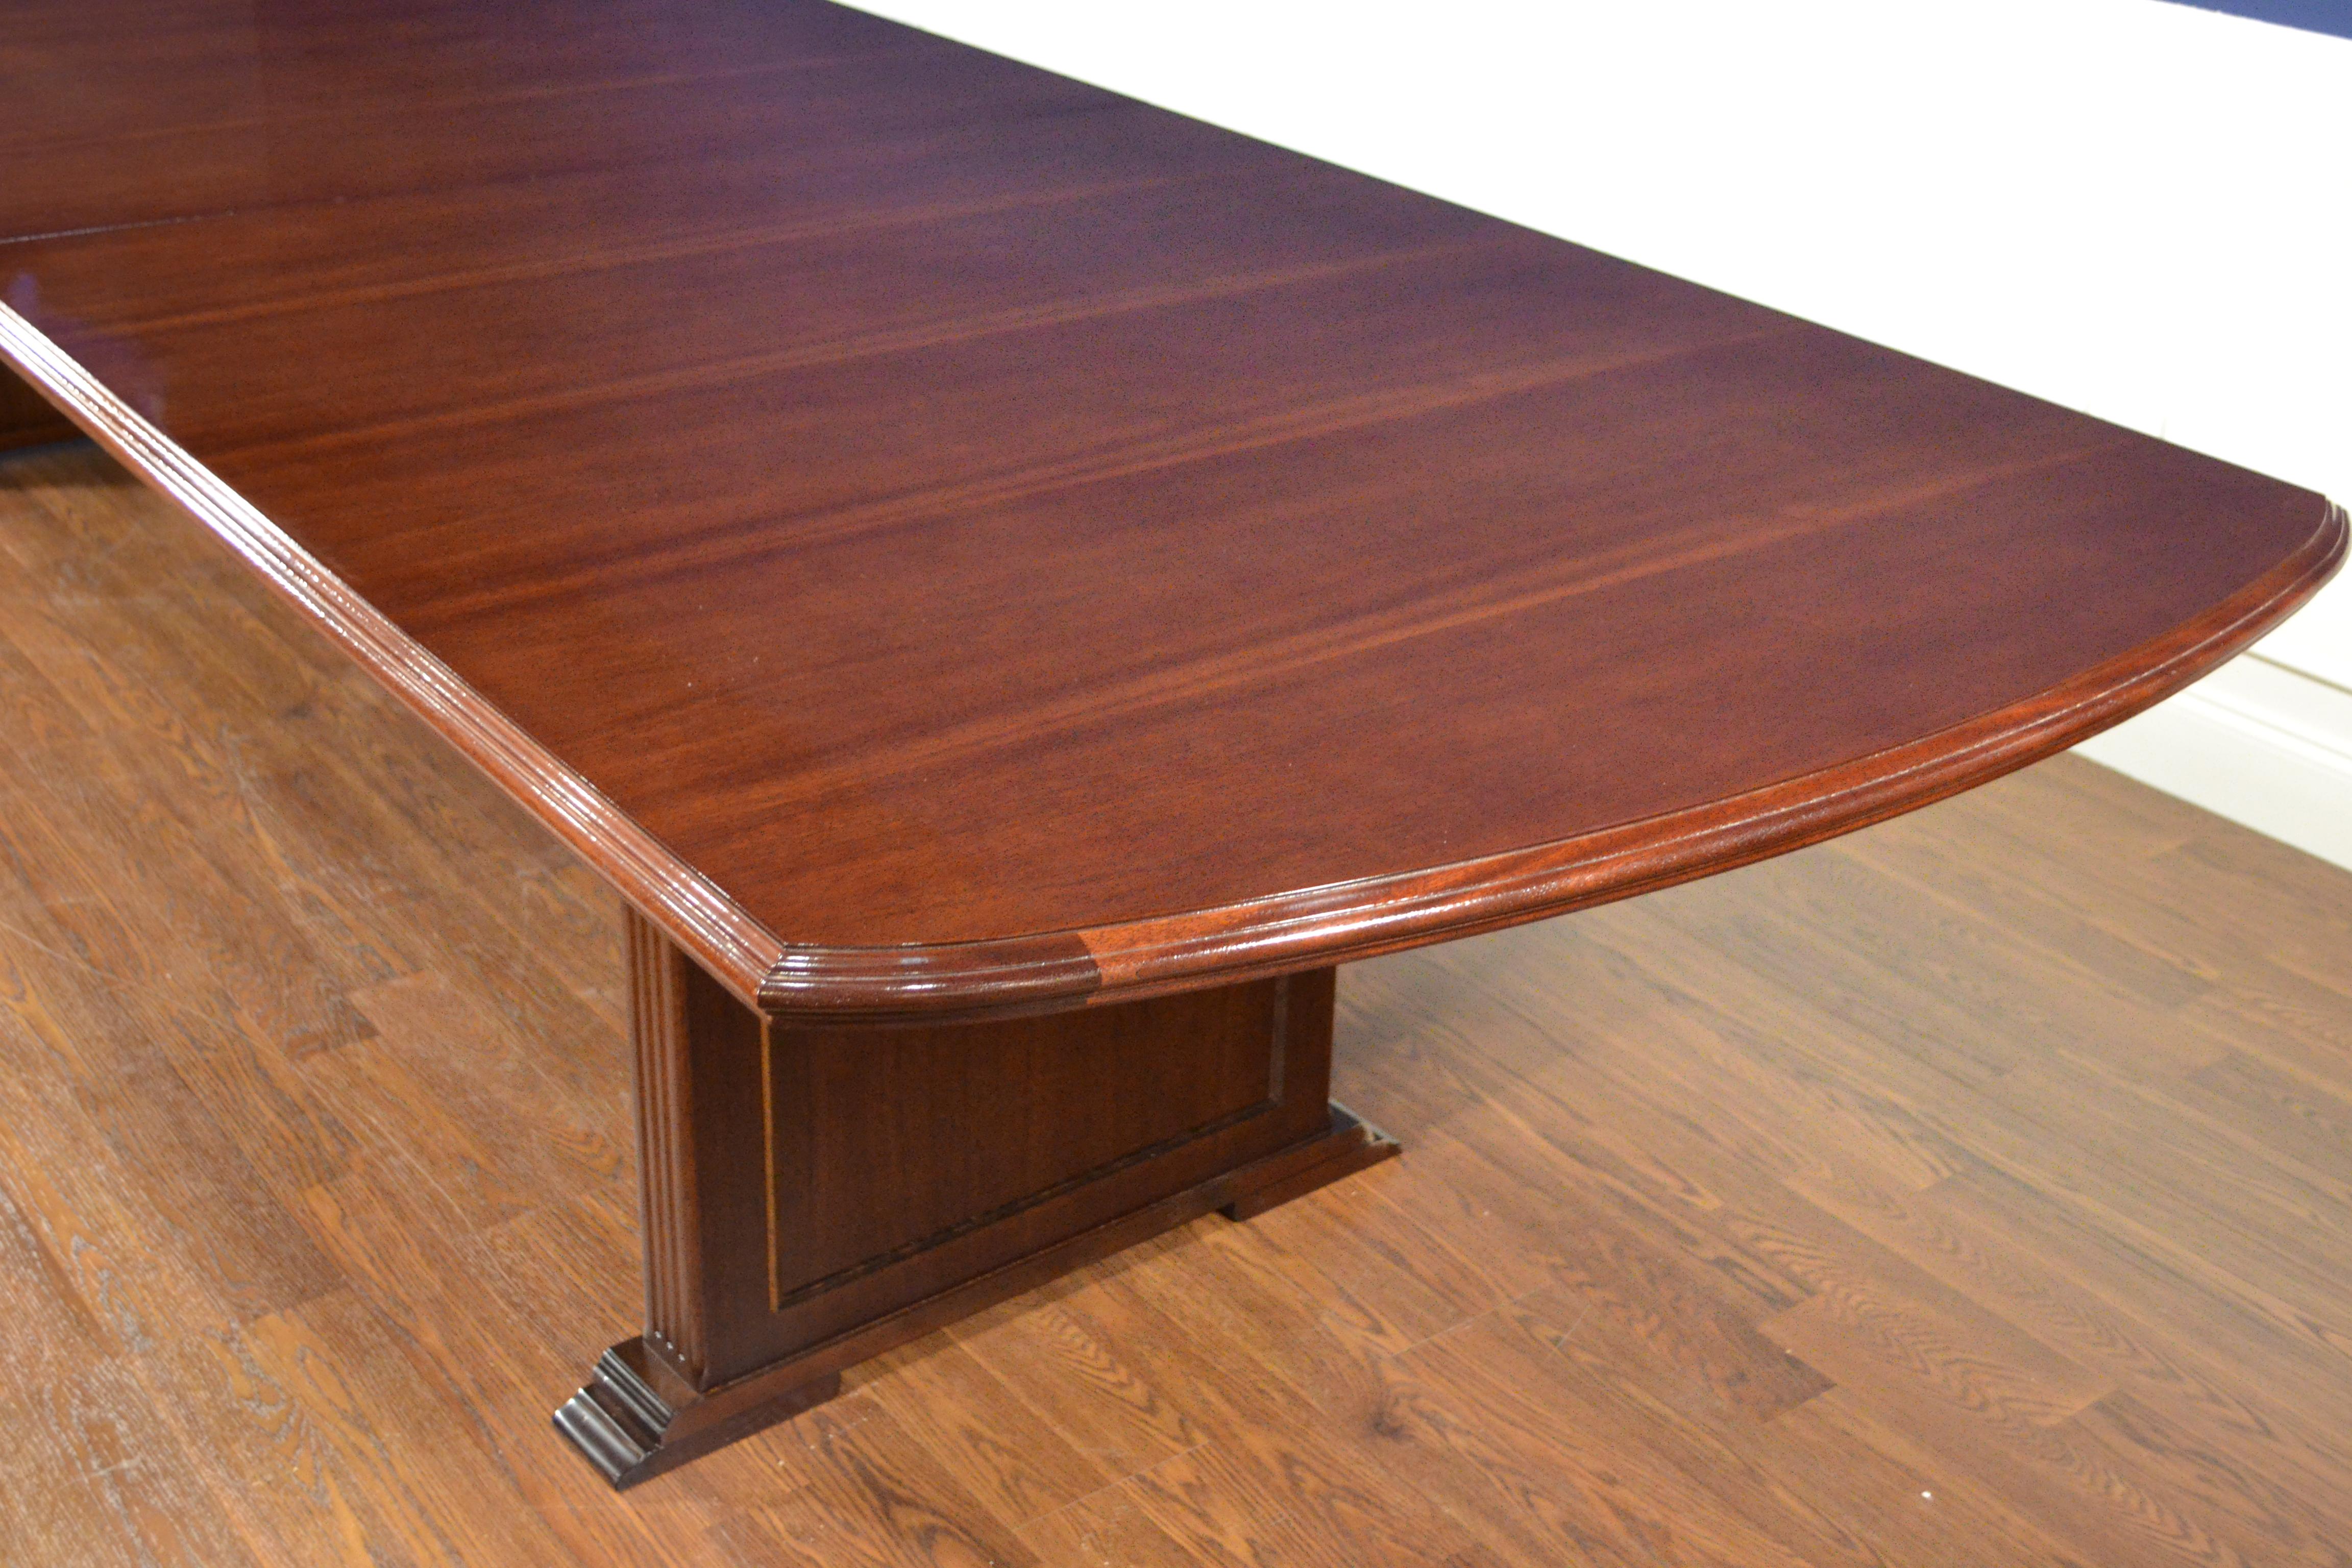 Large Mahogany Rectangular Pedestal Conference Table by Leighton Hall For Sale 2